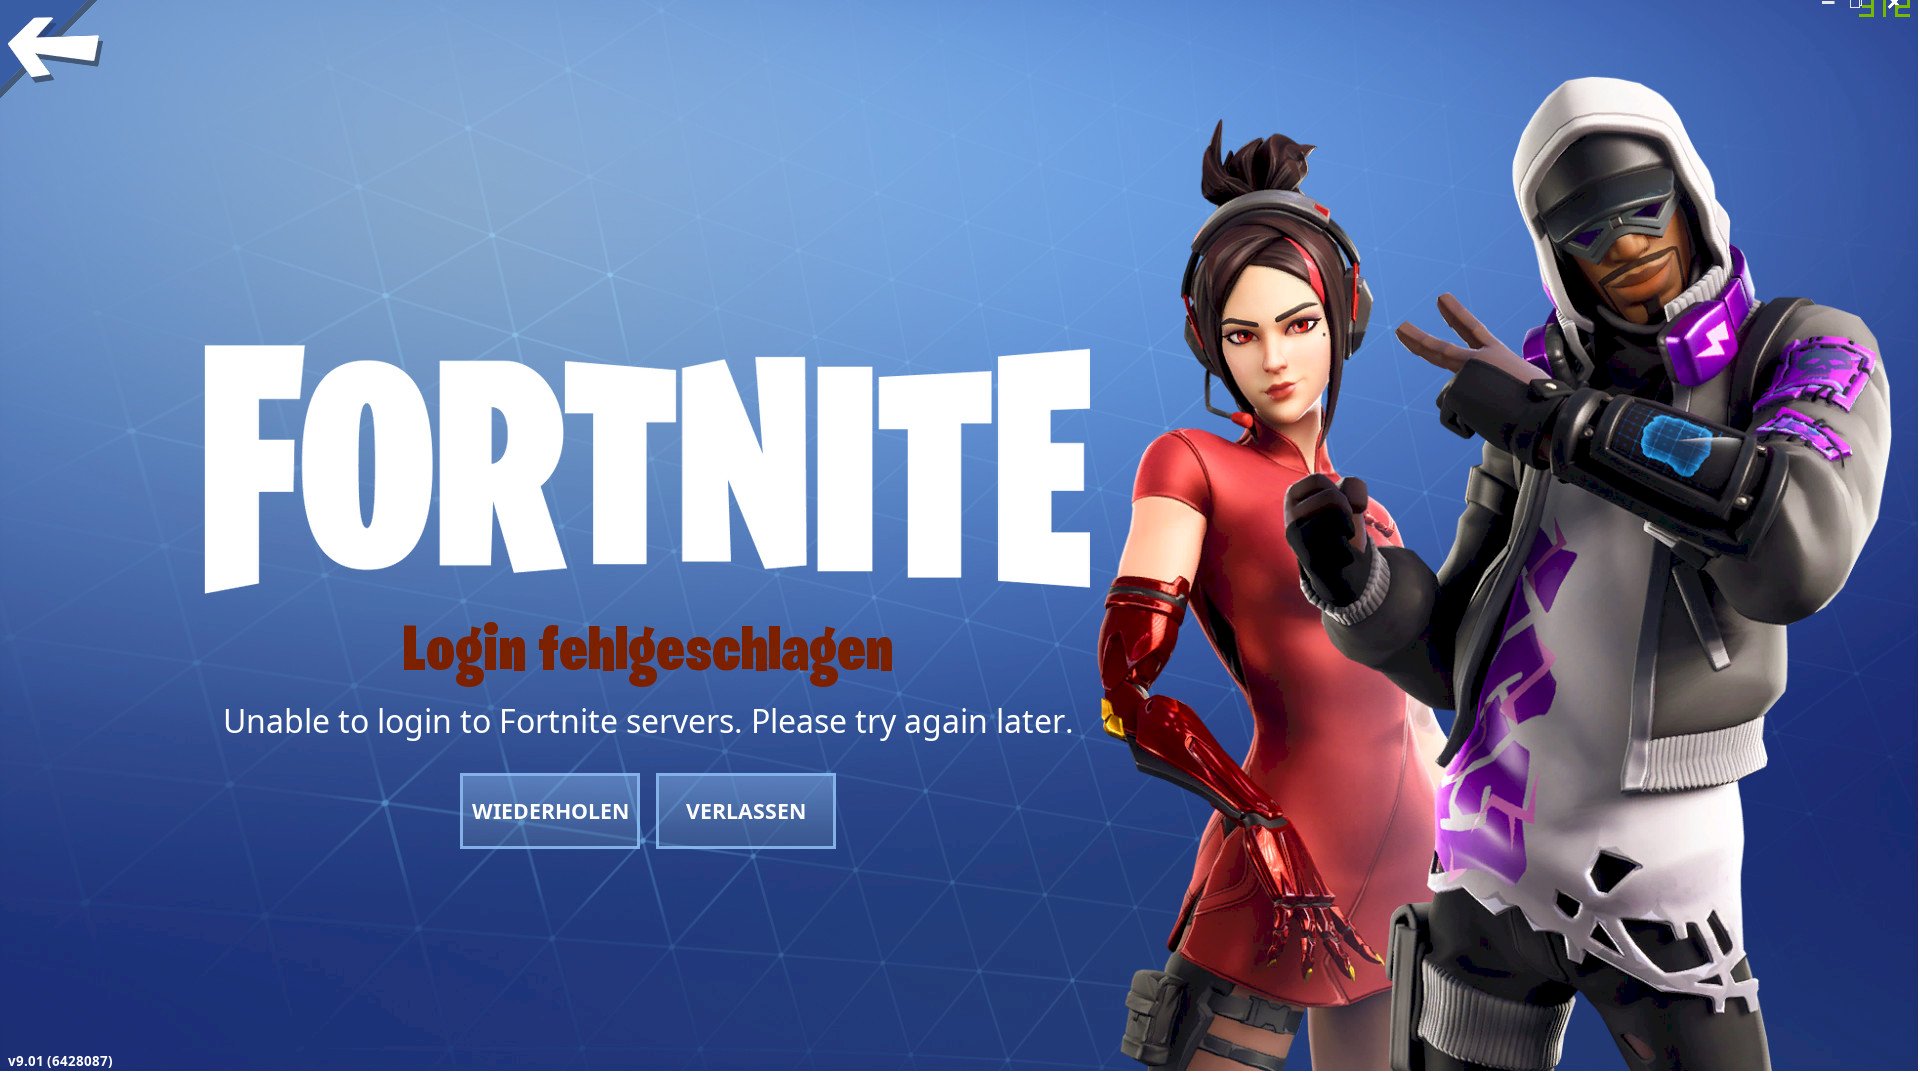 Fortnite: Login failed see picture